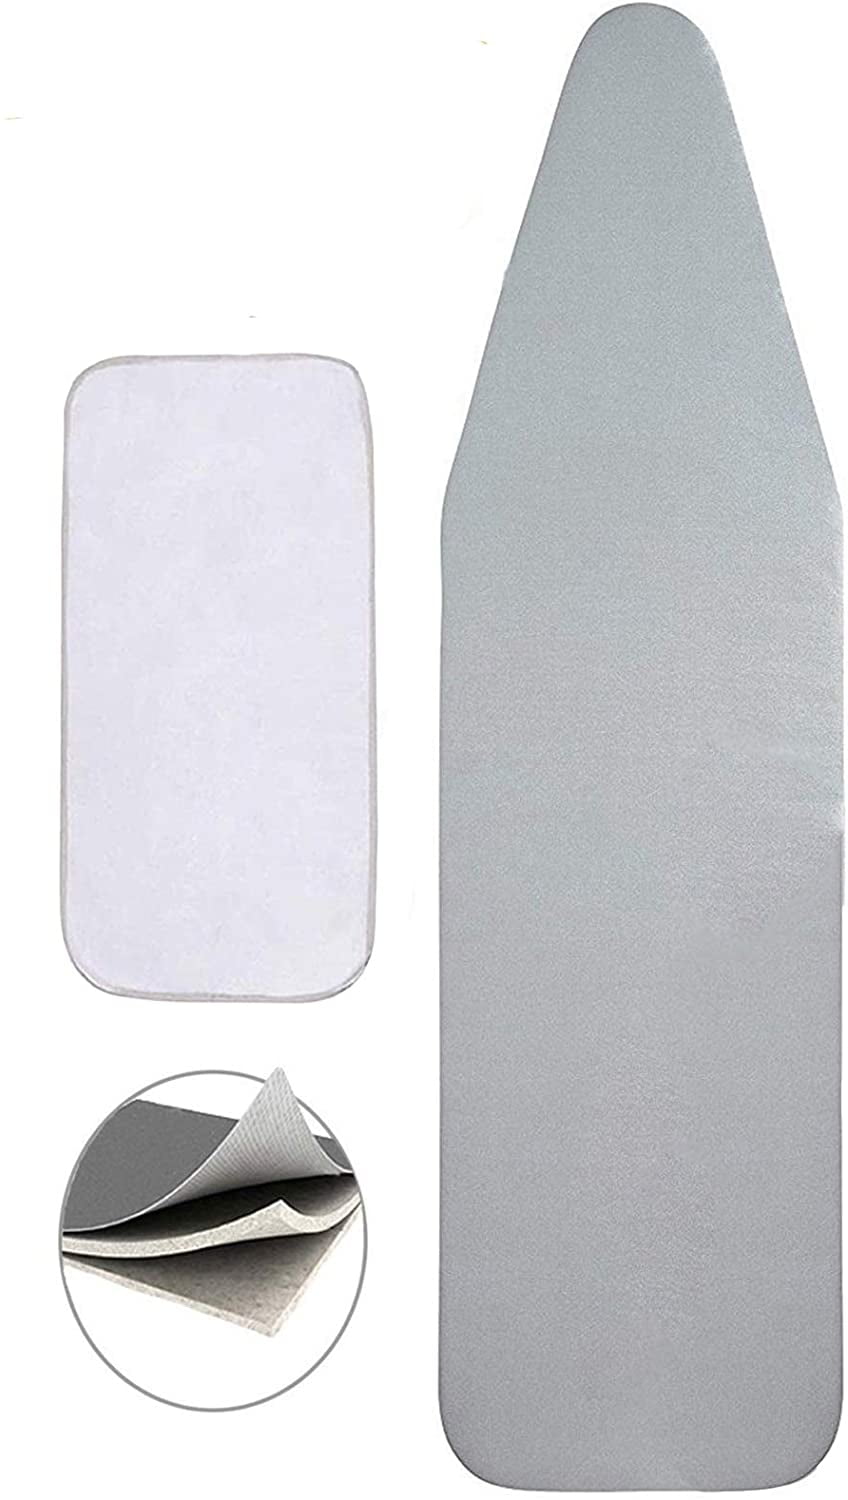 Ironing Board Cover Pad Coated Resists Scorching Staining Ironing Board Pads 